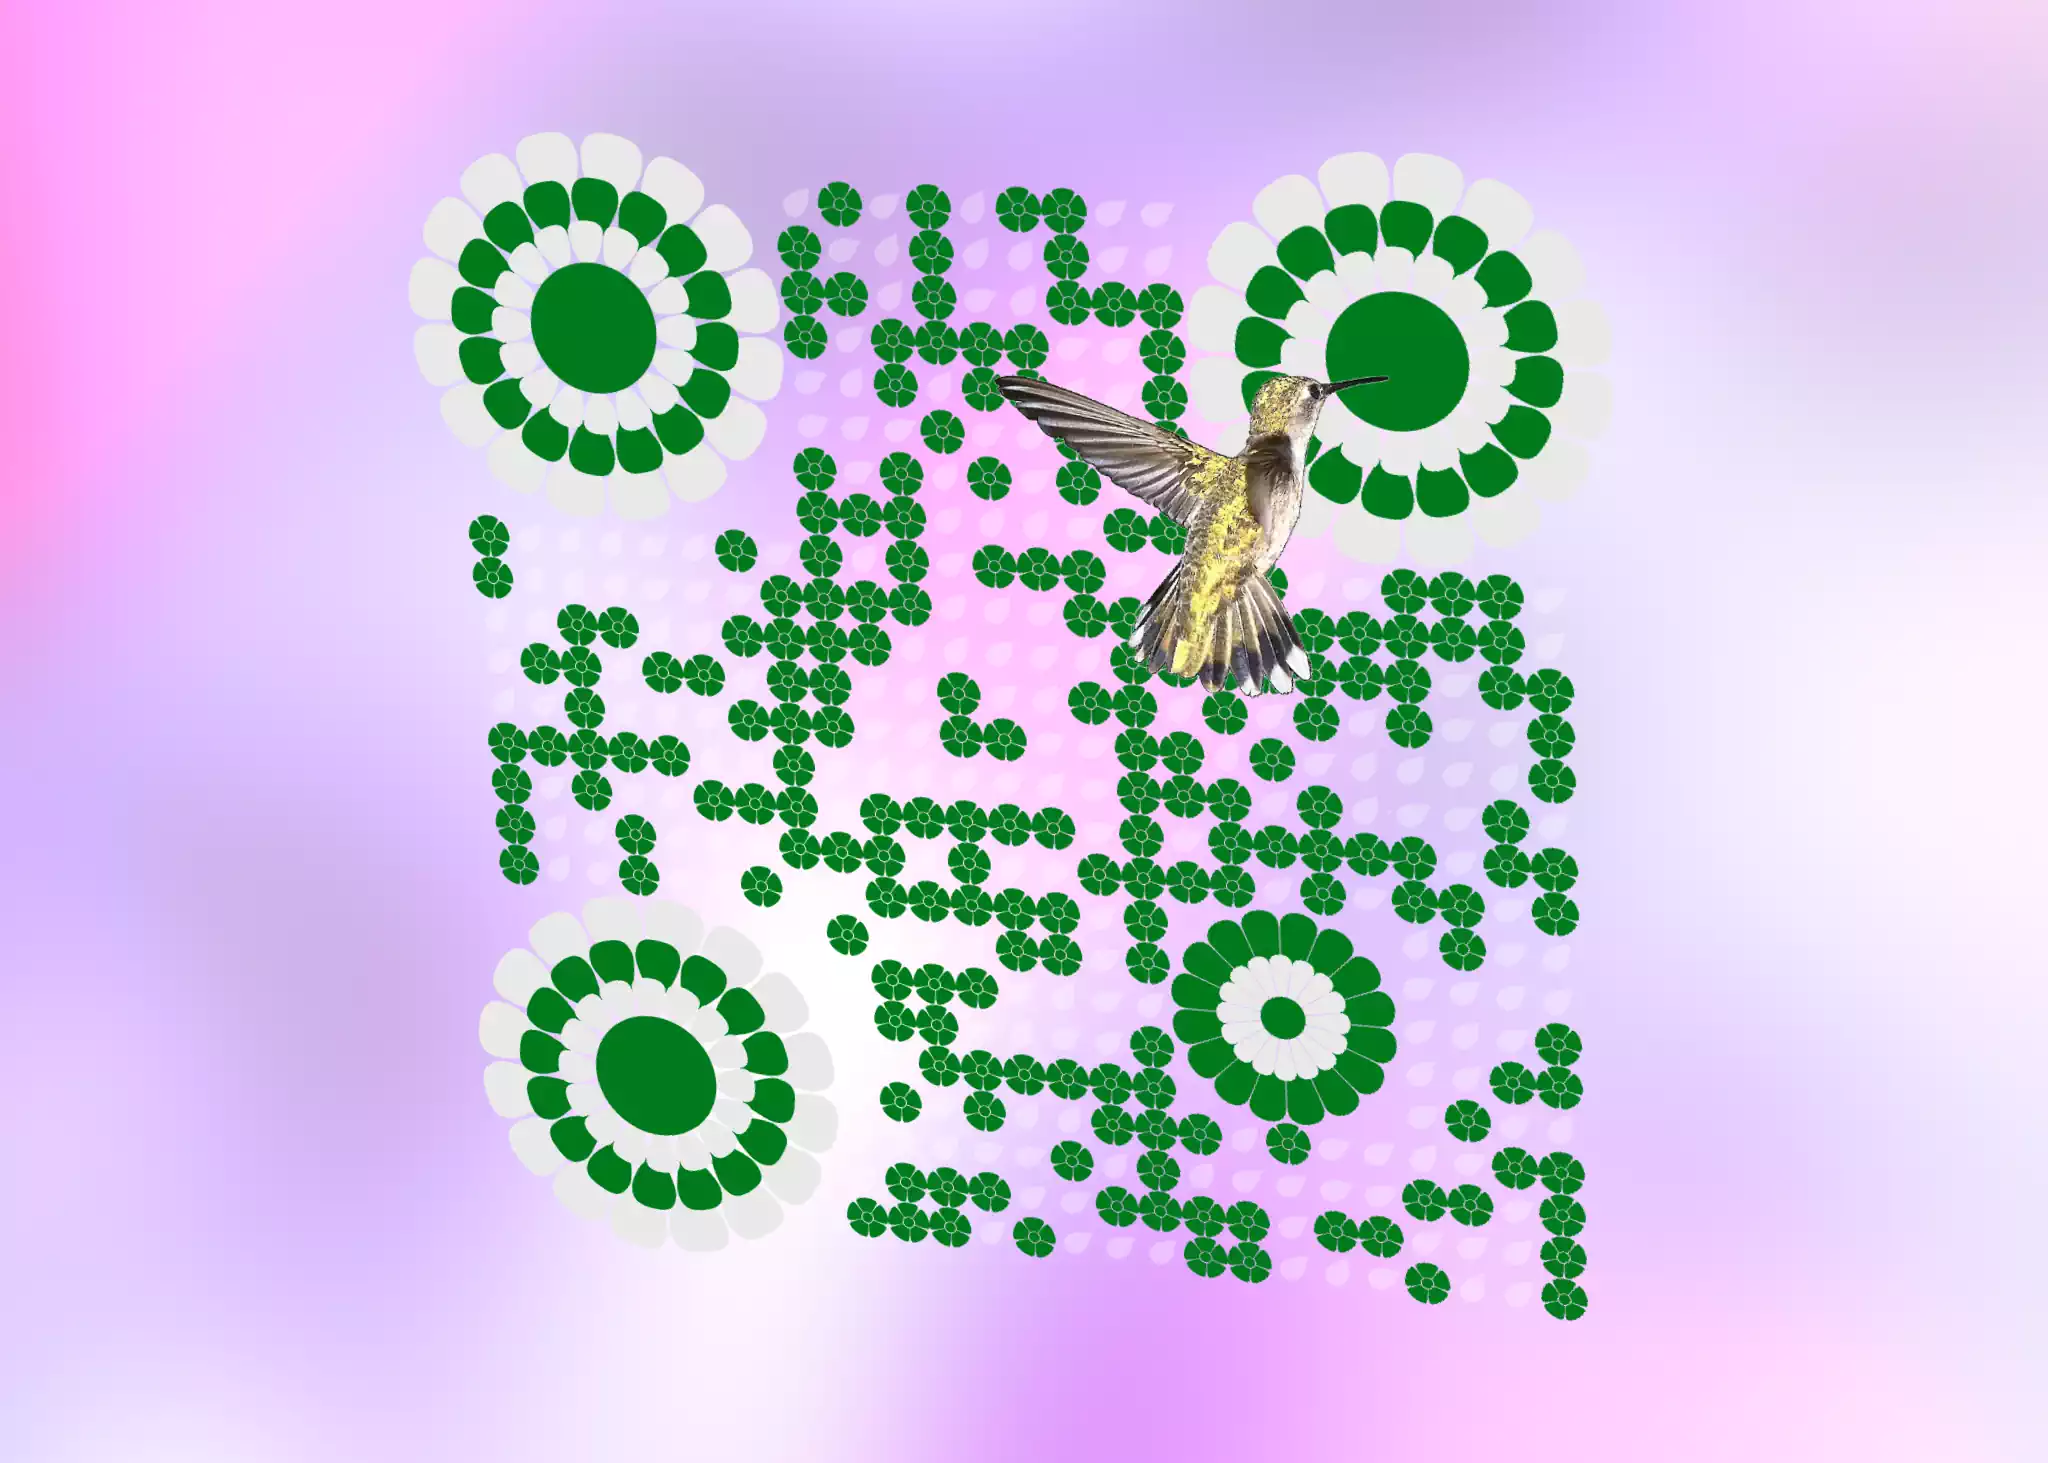 QRcodeLab online qr generator and image editor - 3D QR image with hummingbird foraging a flower